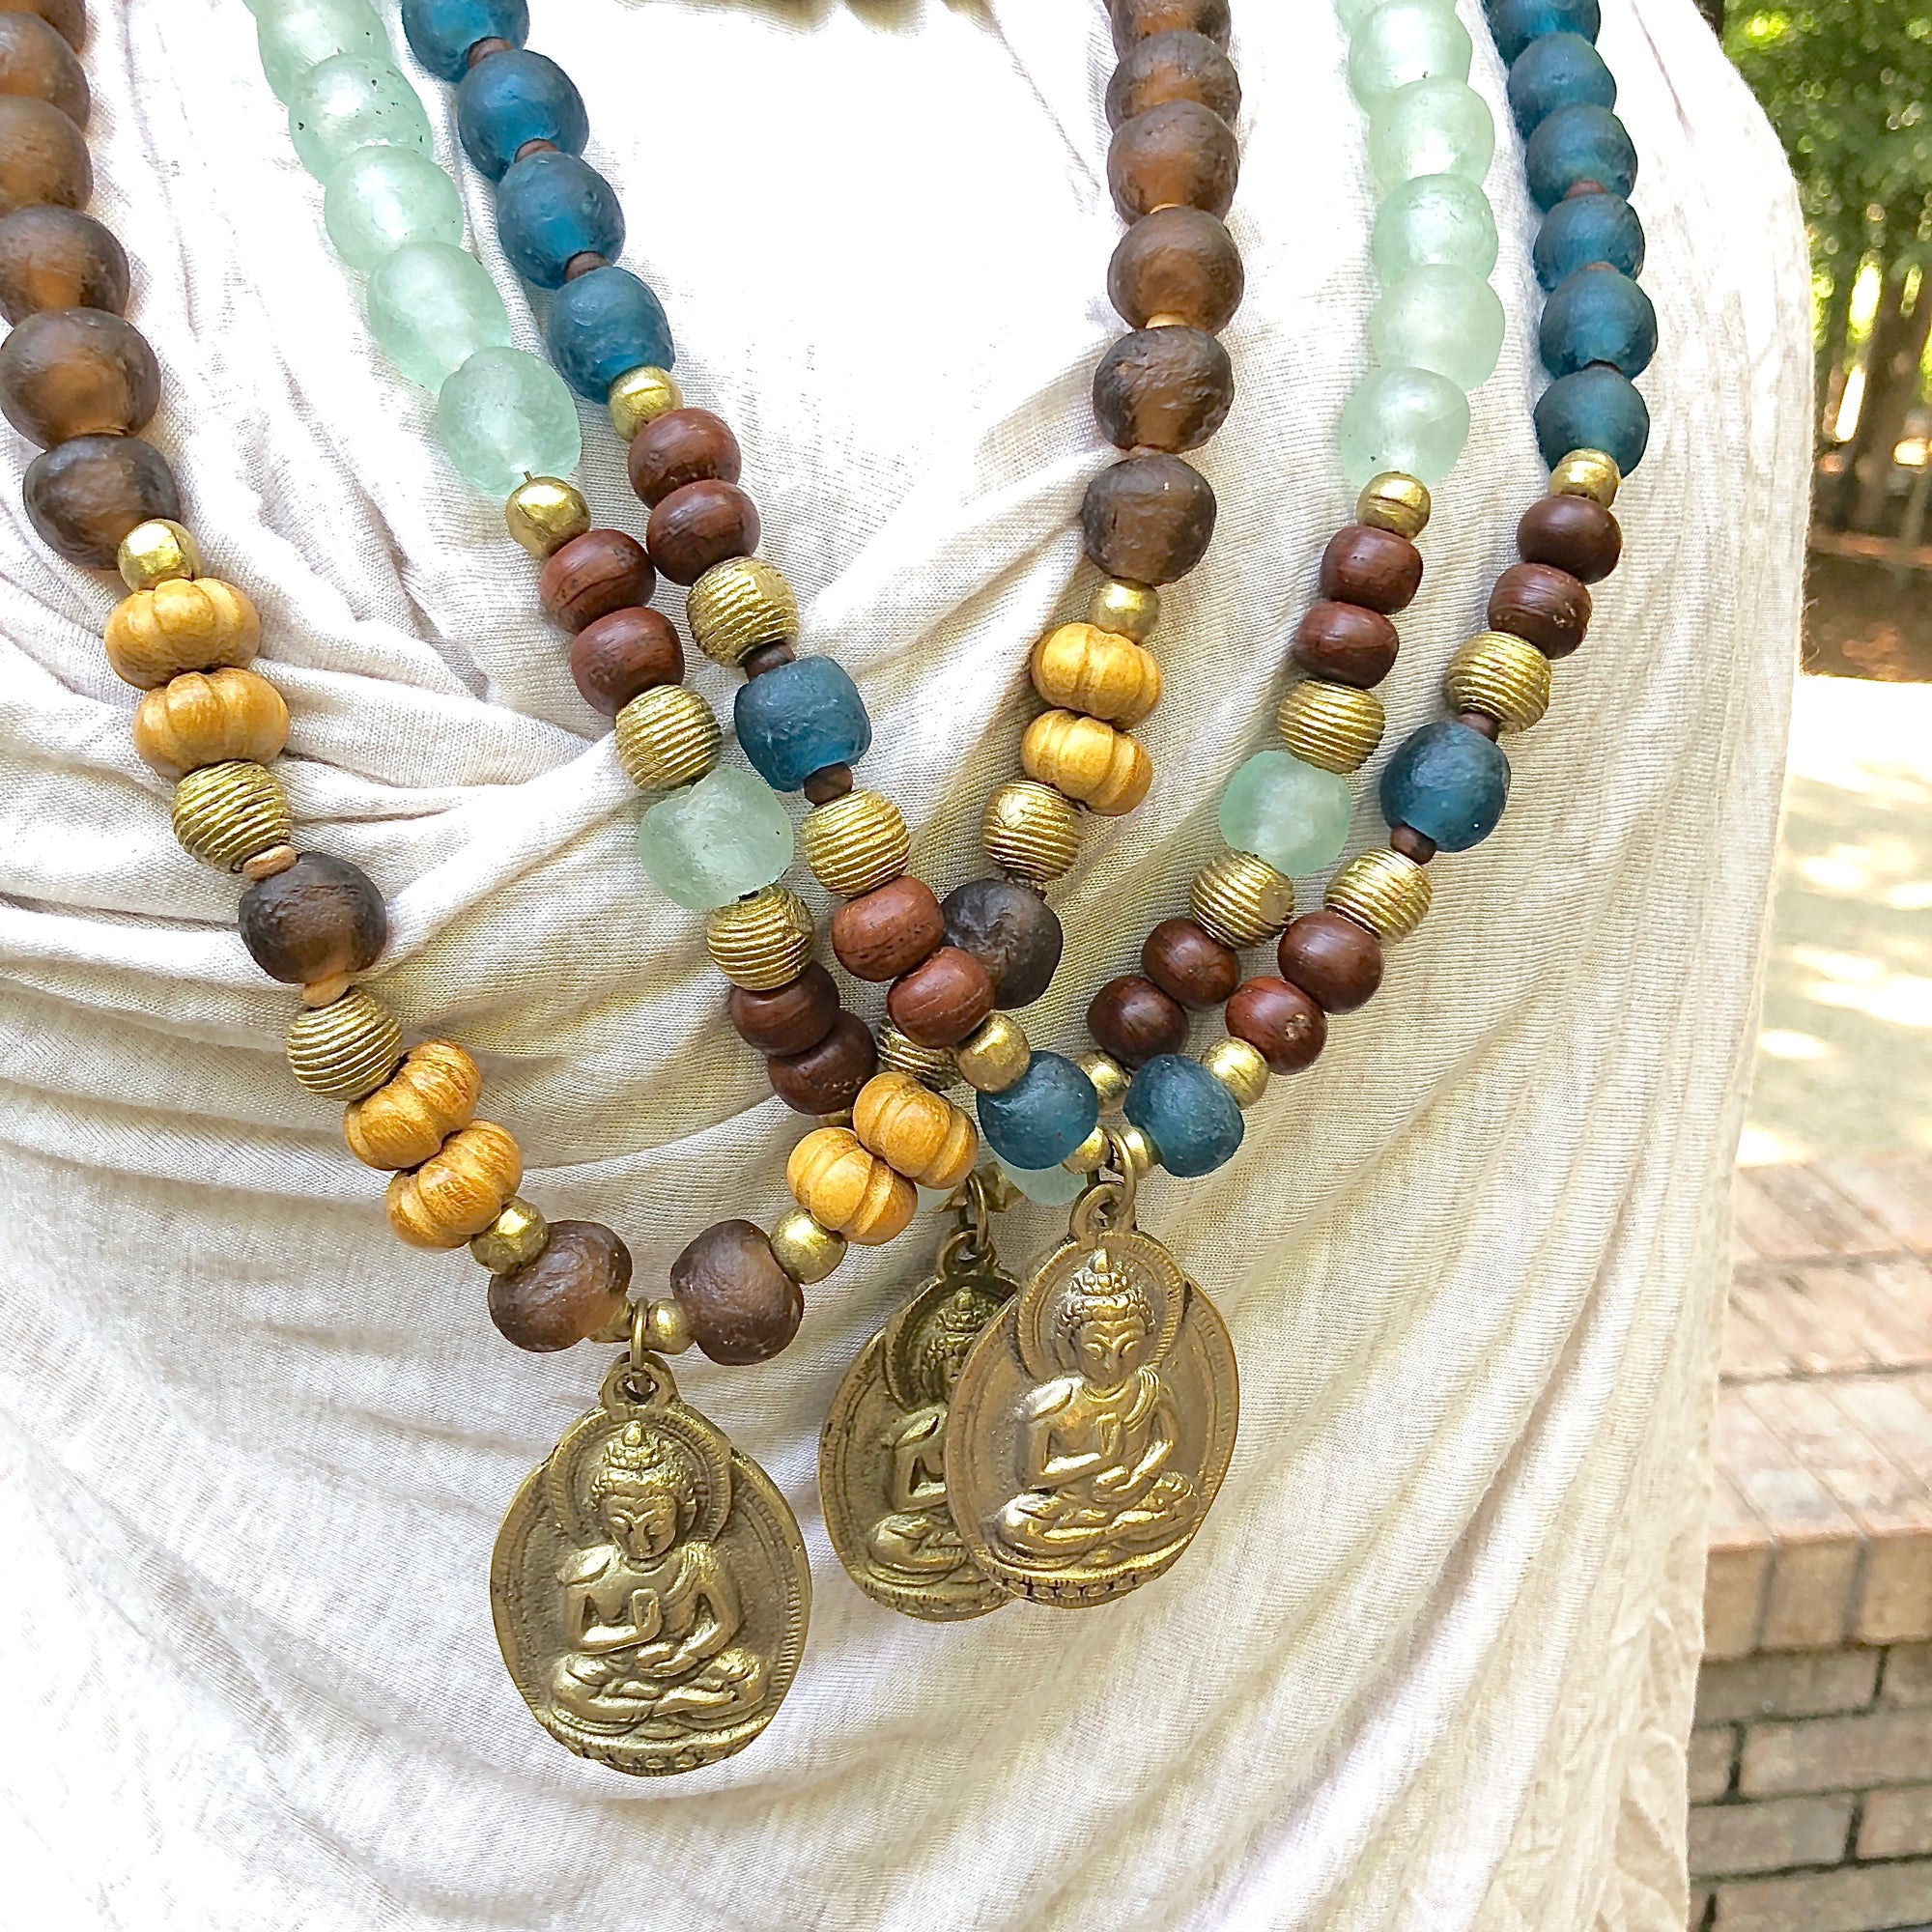 African recycled bottle beads brass Buddha necklace. Cristina Tamames Jewelry Designer